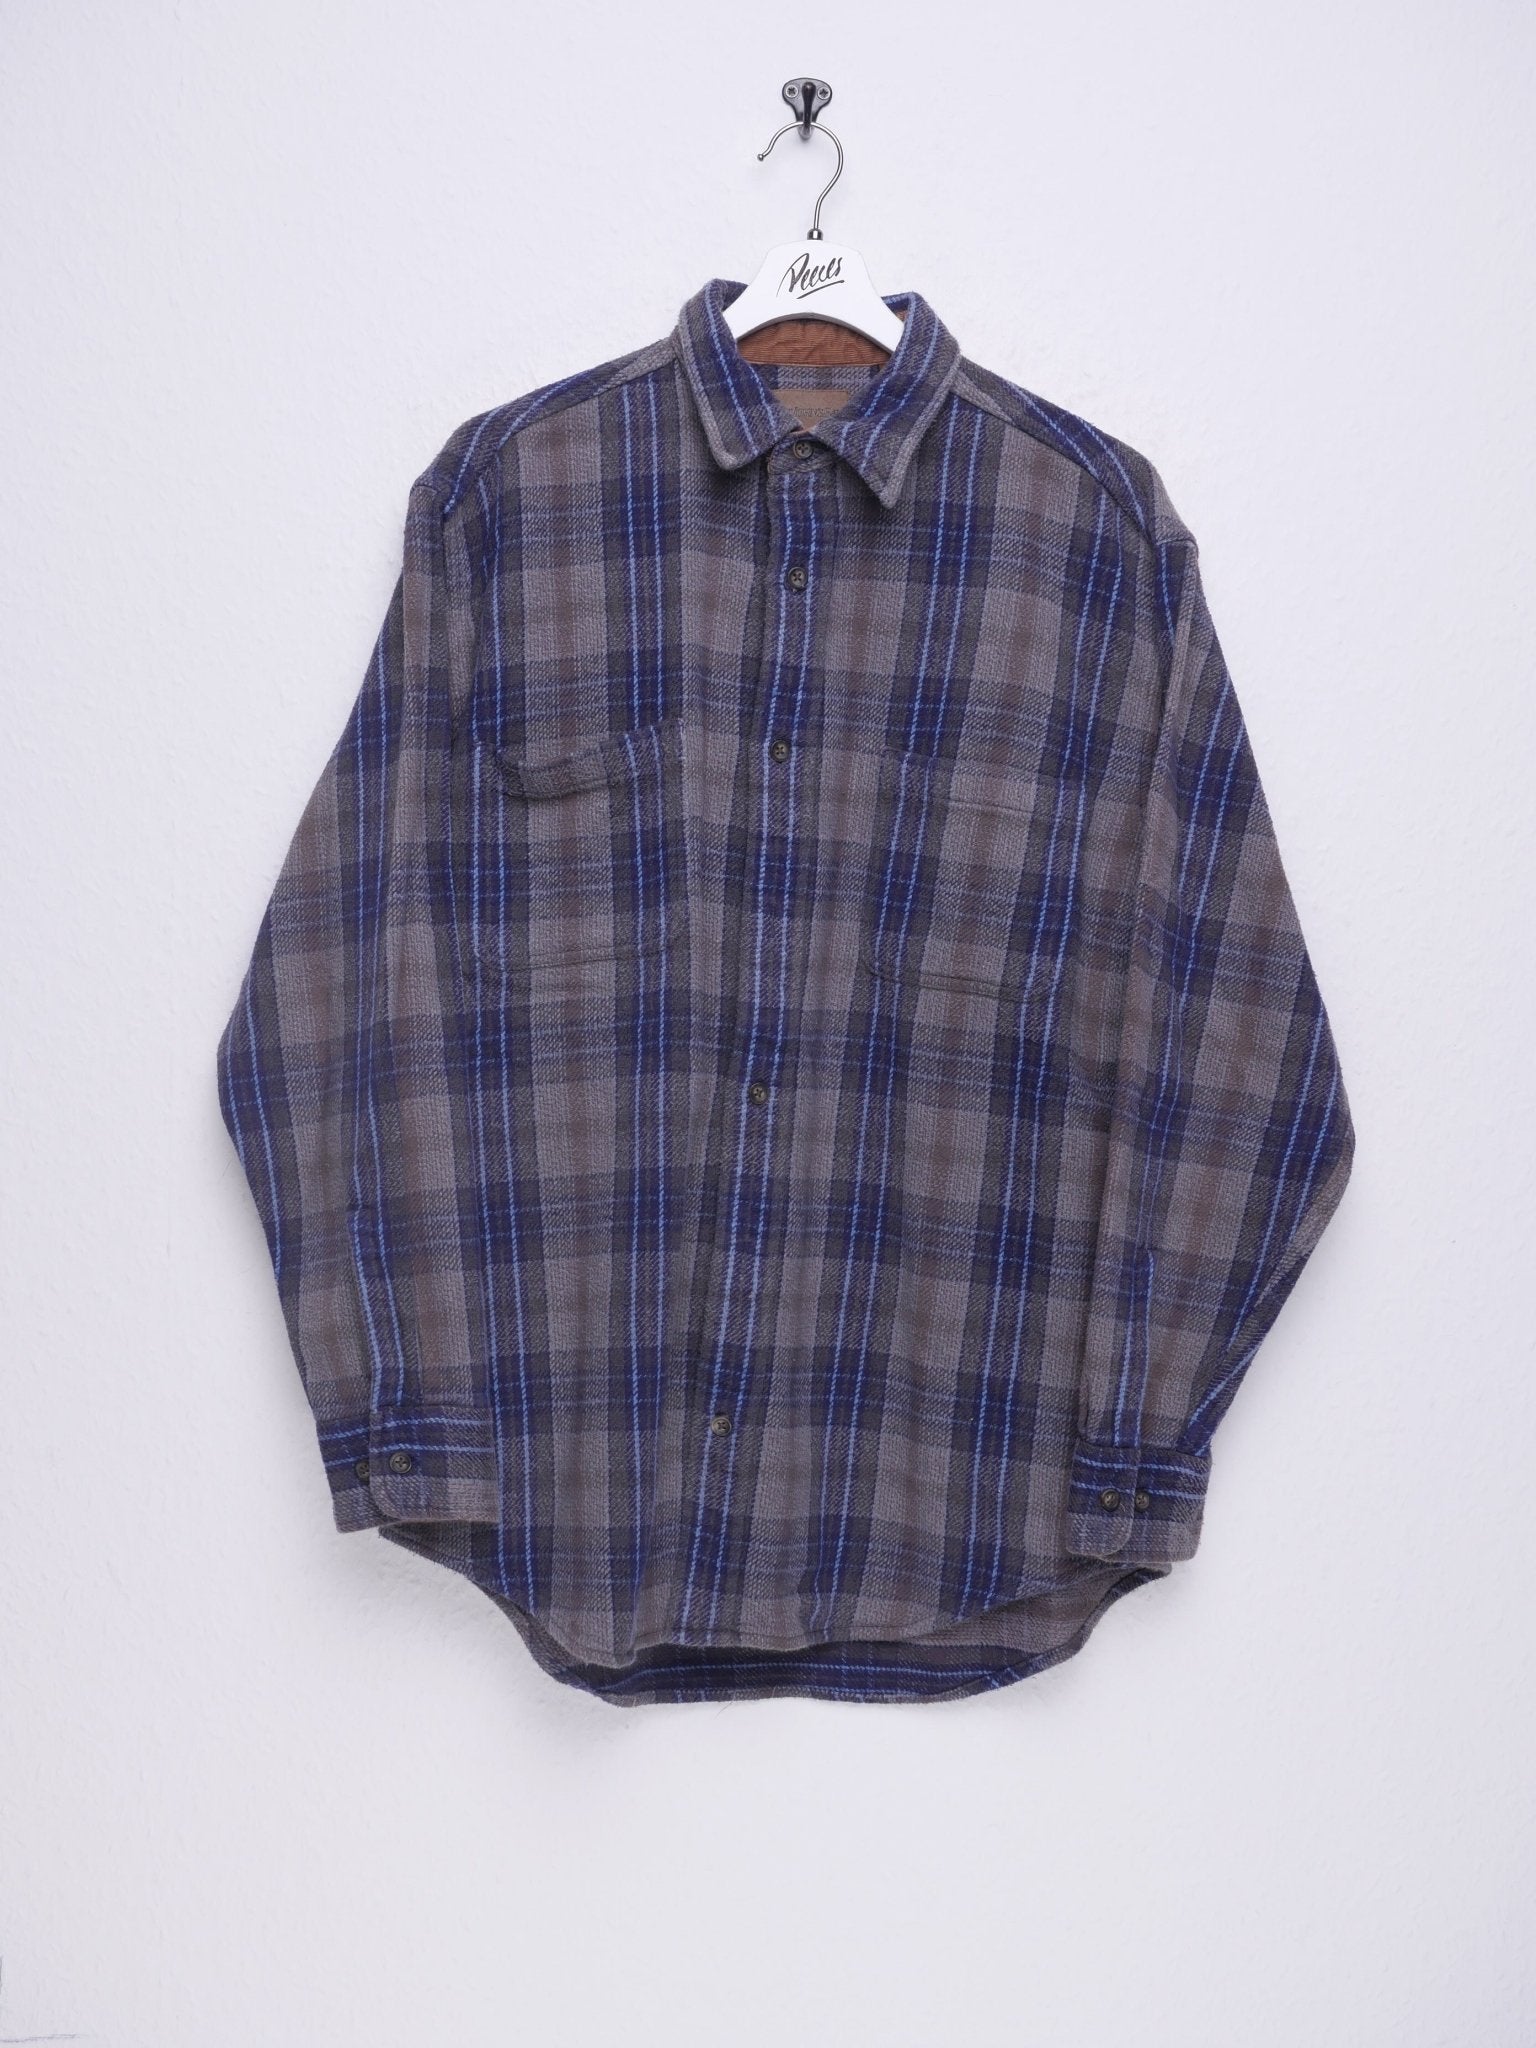 Multicolored checkered L/S Button Down Langarm Hemd - Peeces